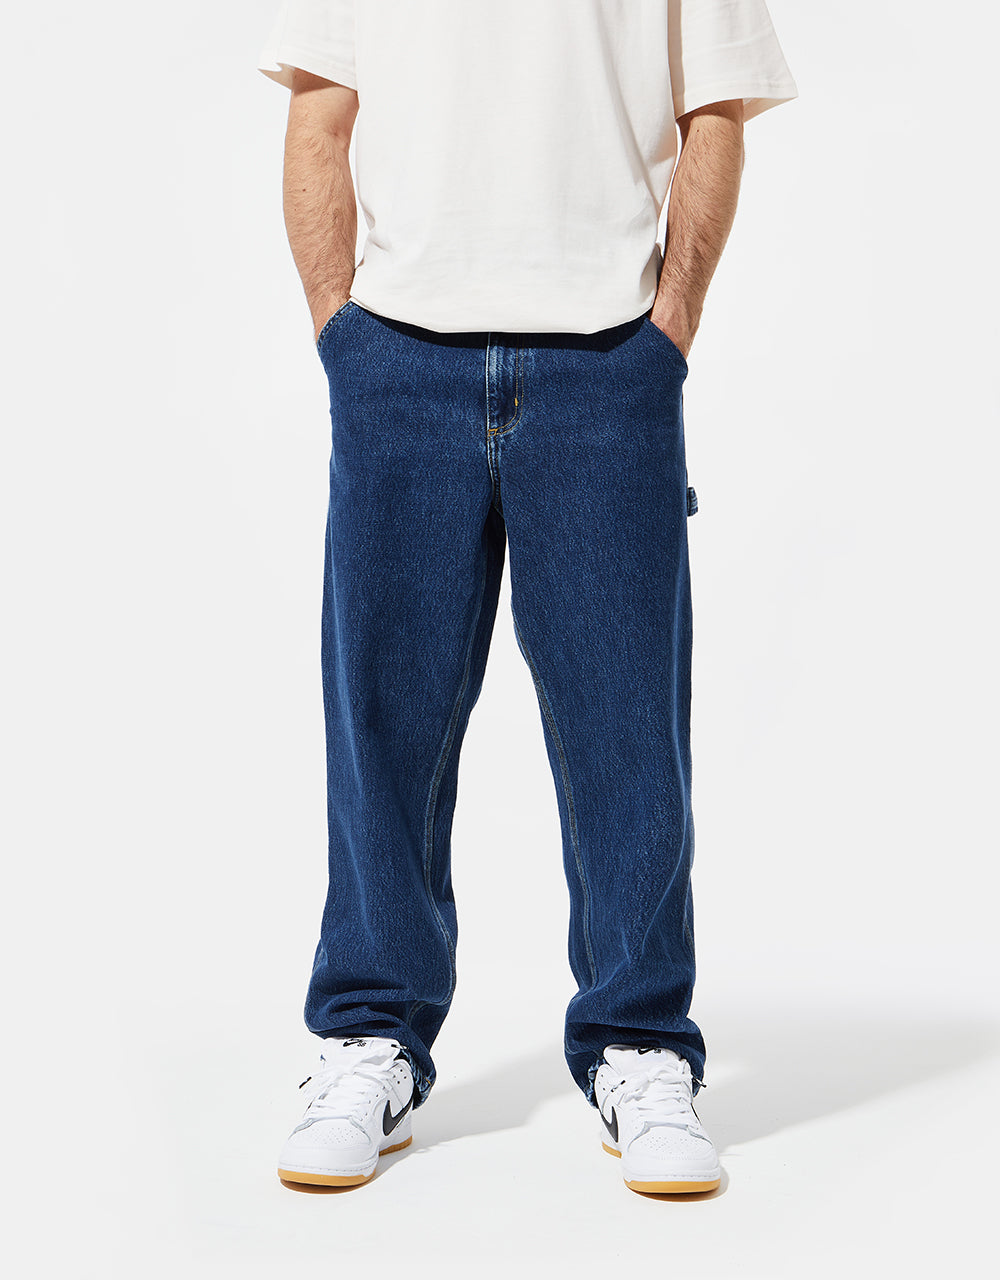 Route One Baggy Denim Jeans - Stone Wash